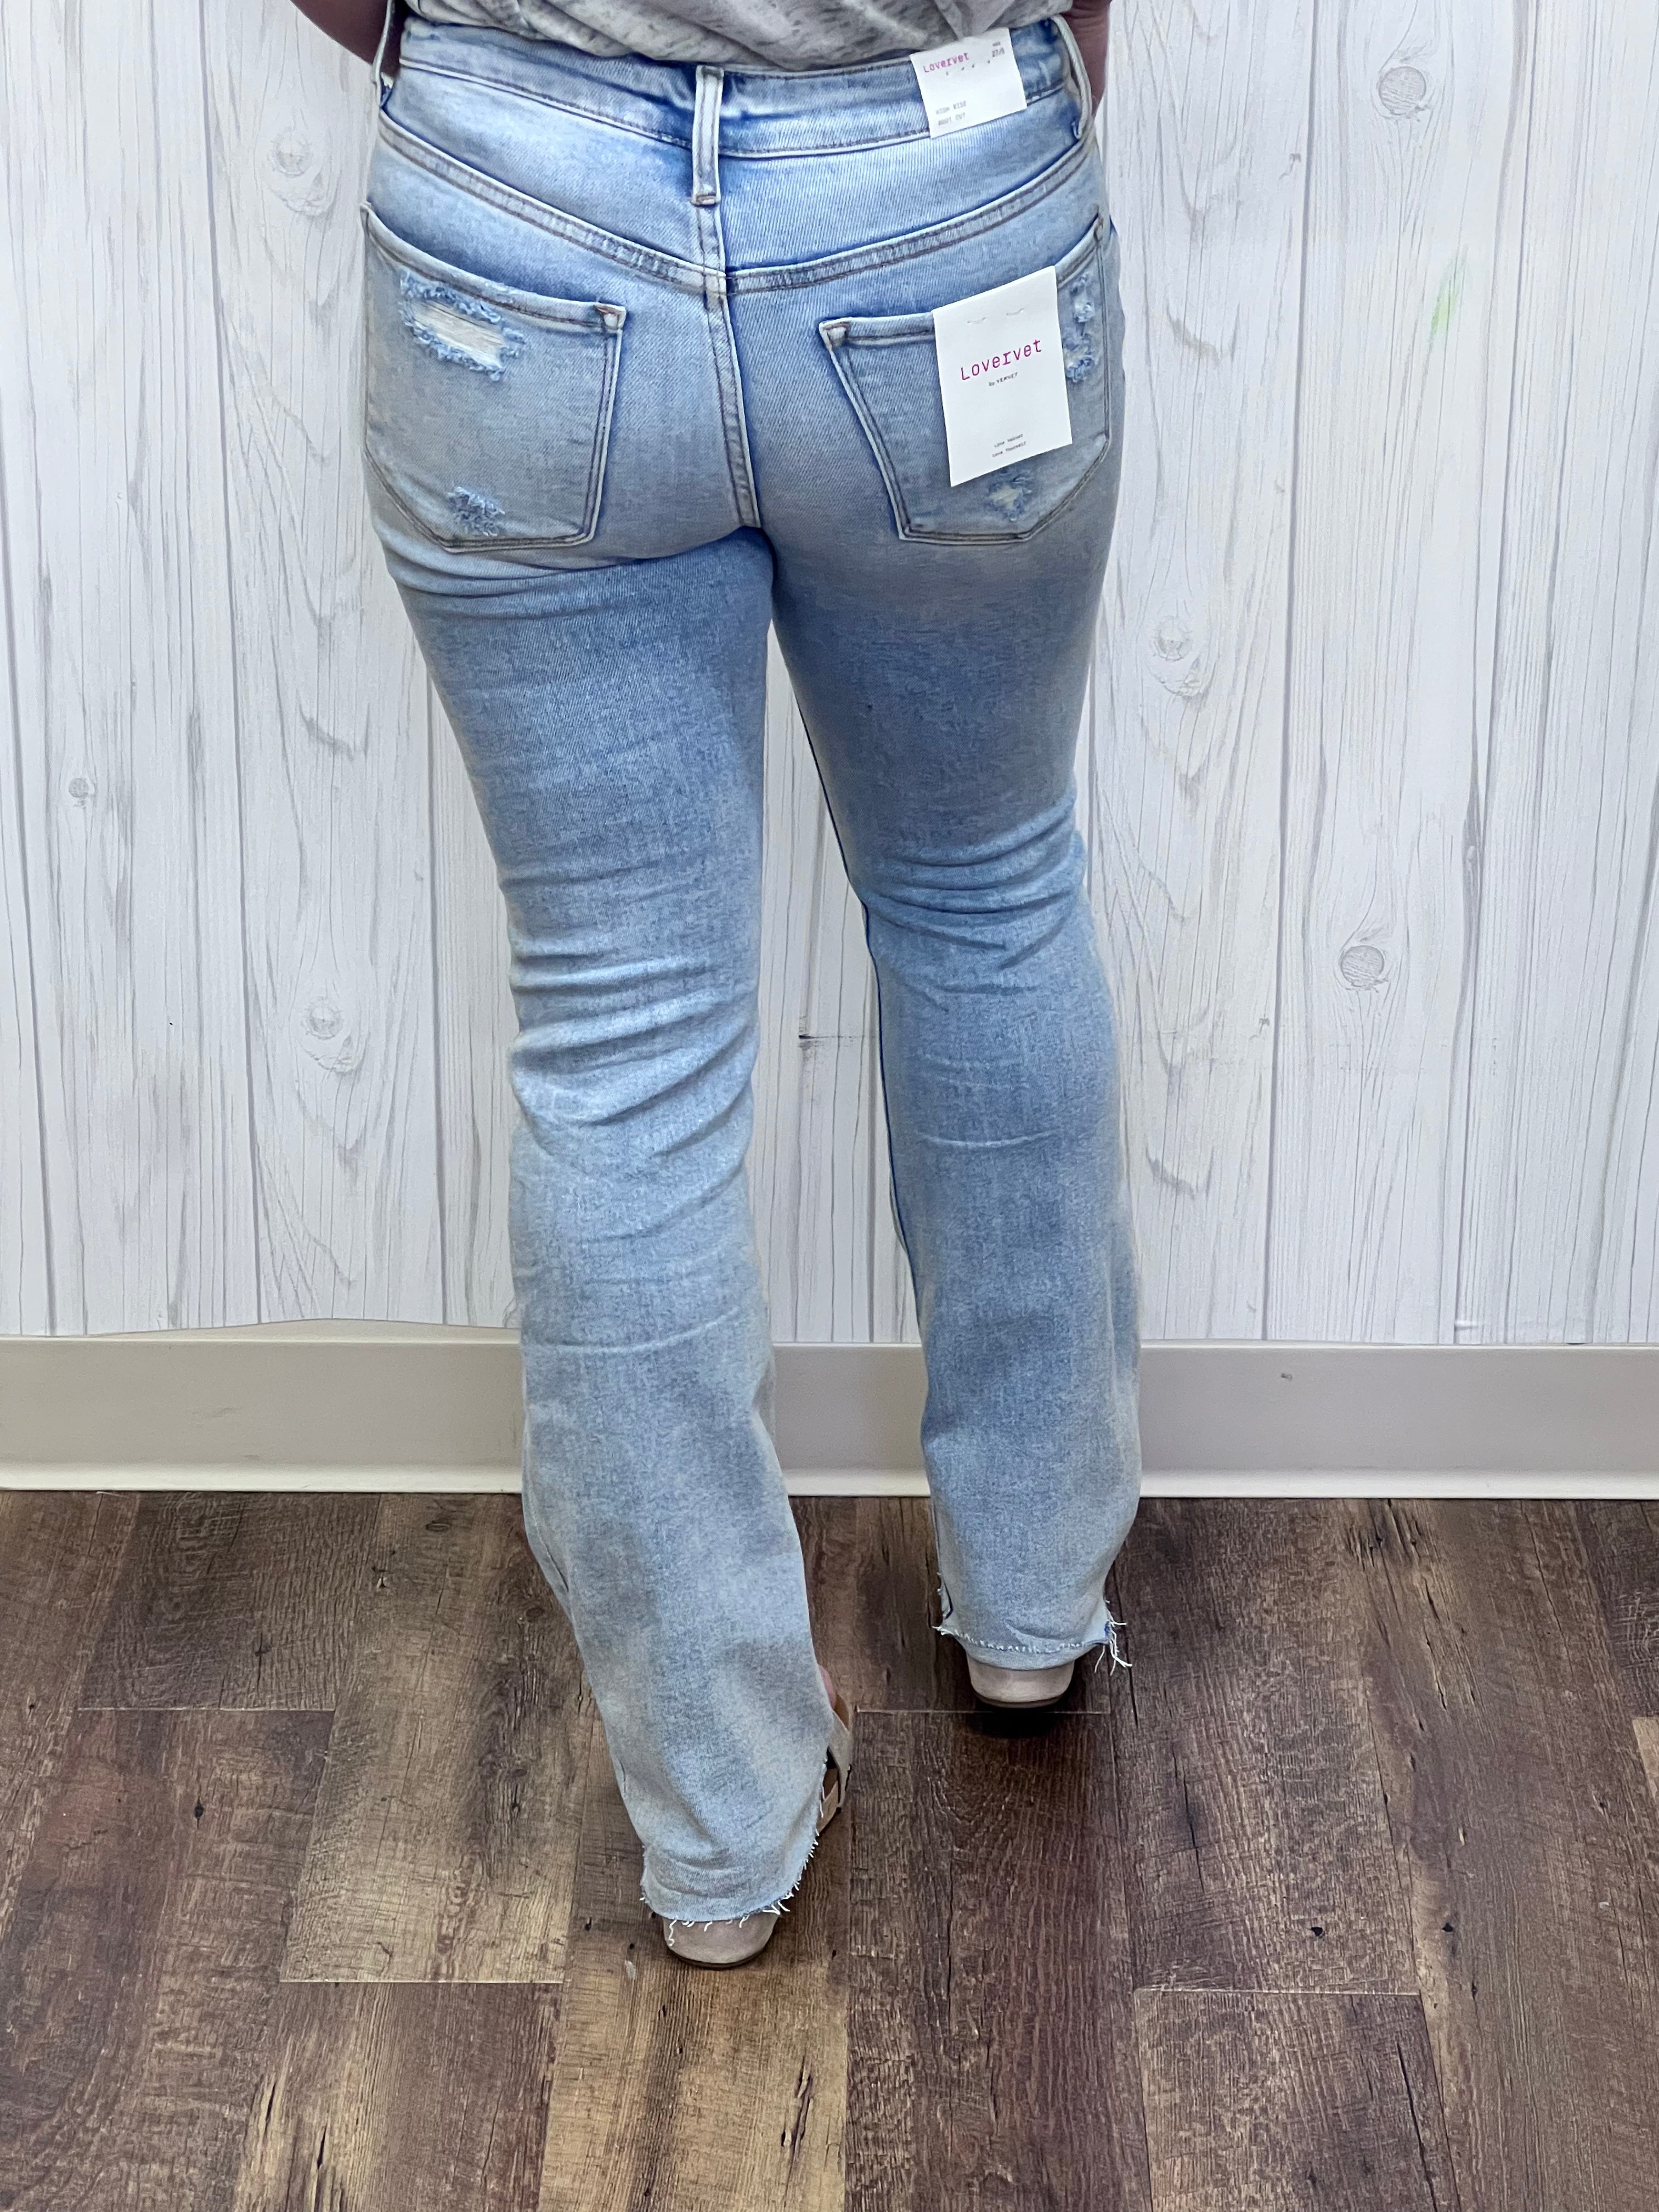 Main Squeeze Bootcut Jeans By Lovervet FINAL SALE